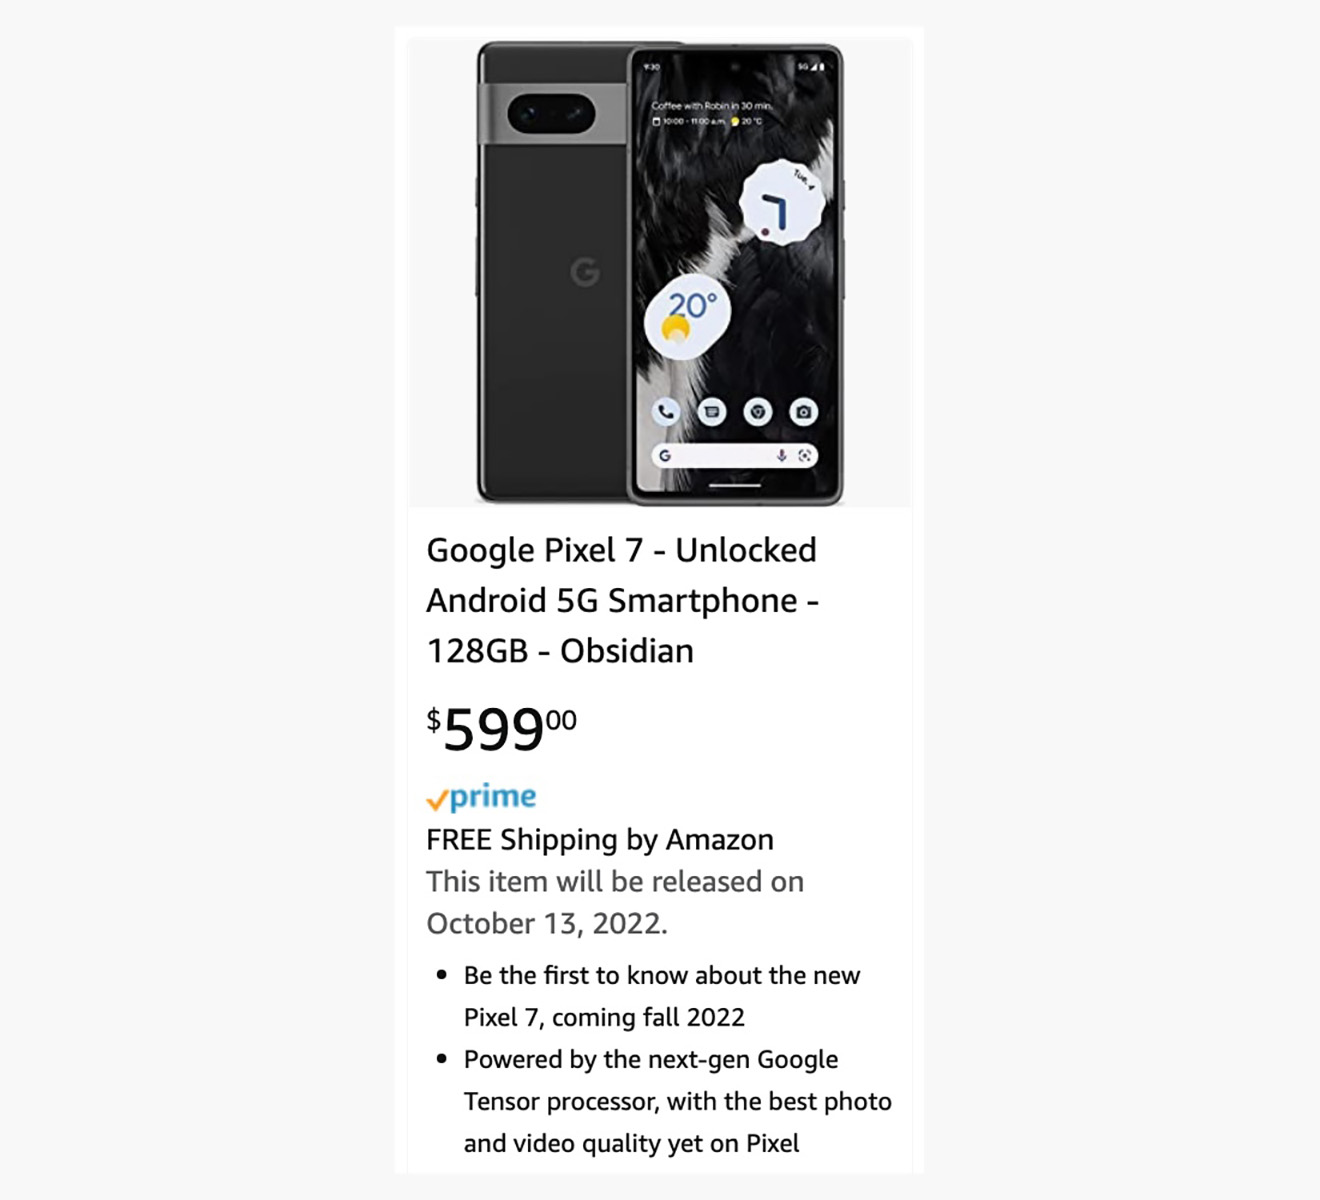 Amazon Out Here Confirming $599 for Pixel 7